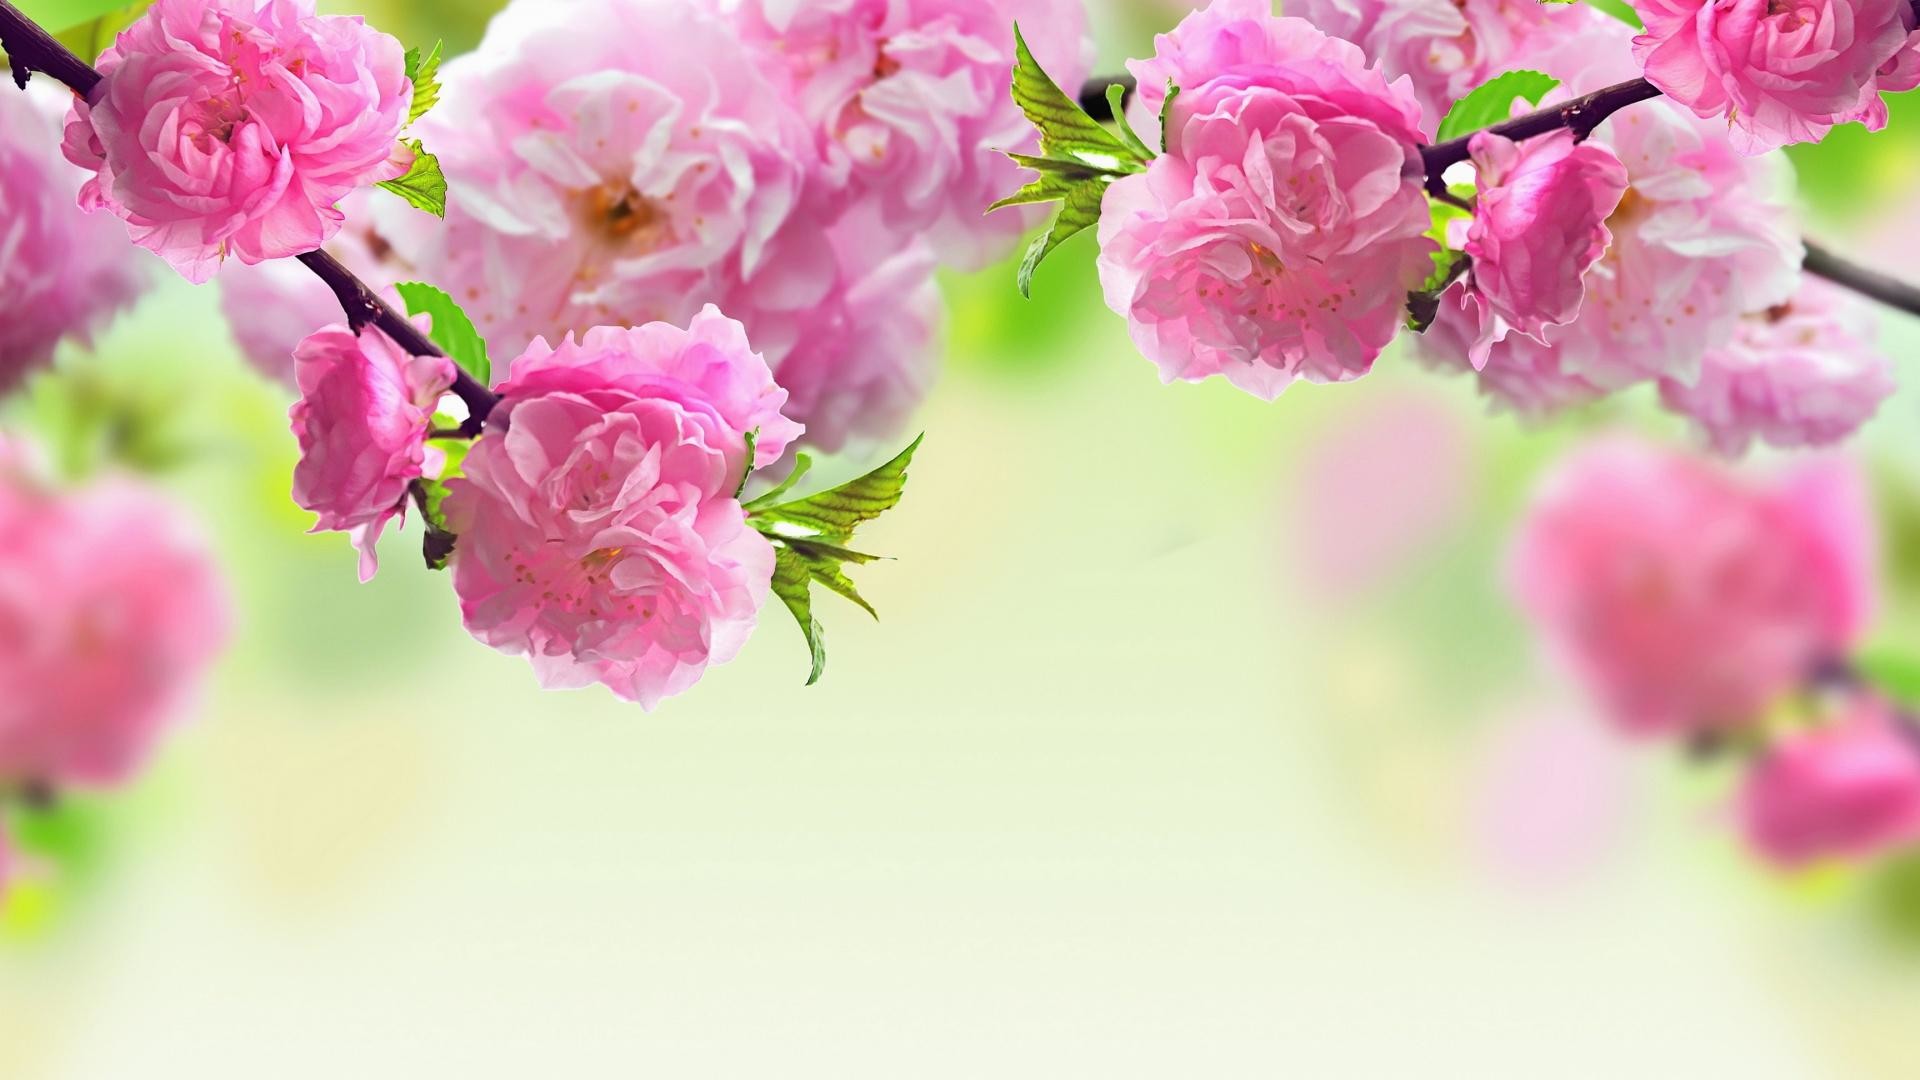 7. funeral flowers pictures7 600×338